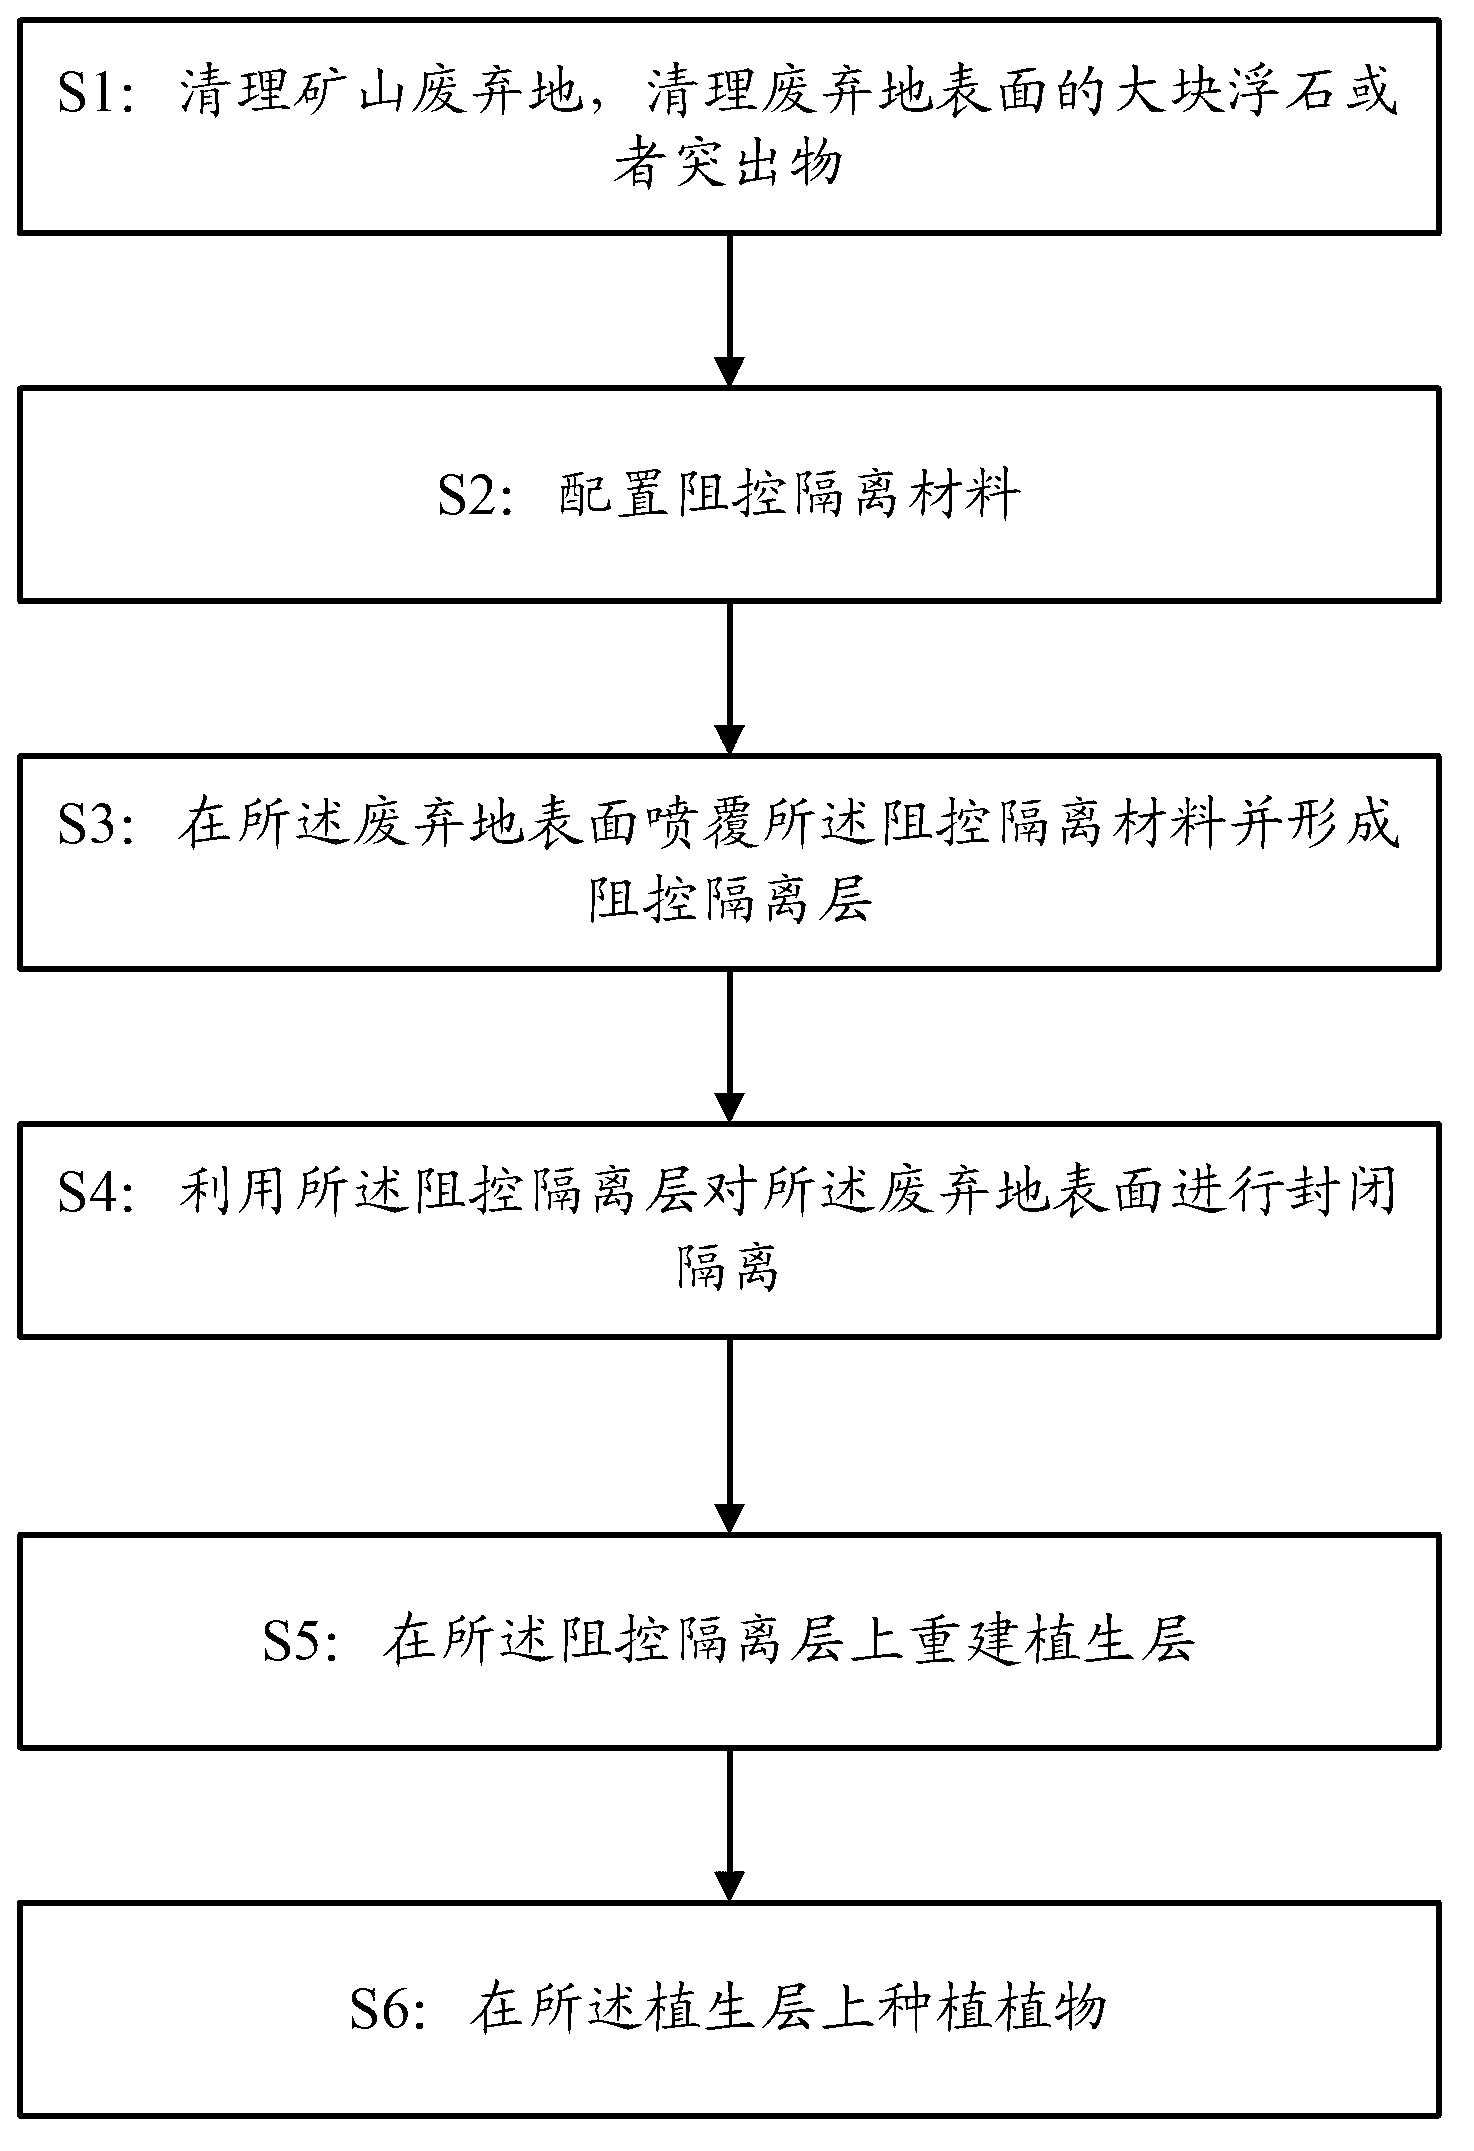 Treatment method for recovering mine polluted land vegetation